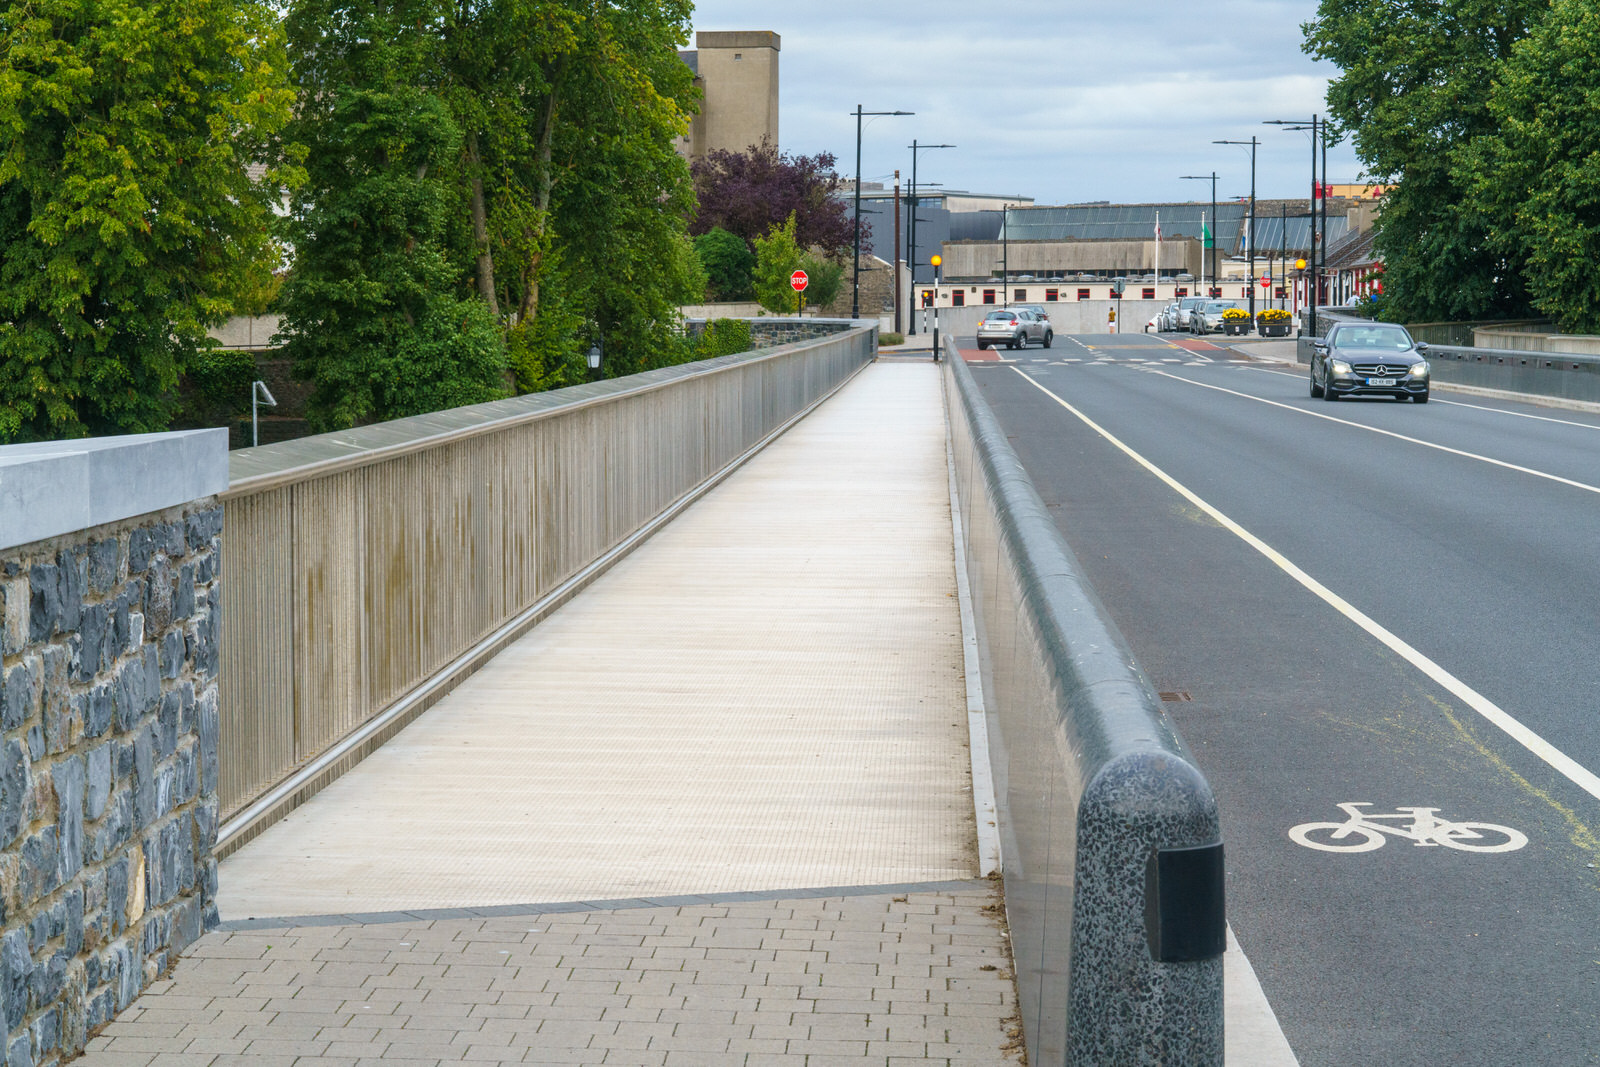 THE NEW ST FRANCIS BRIDGE IN KILKENNY AND THE SURROUNDING AREA [OPENED TO THE PUBLIC IN 2017]-227040-1